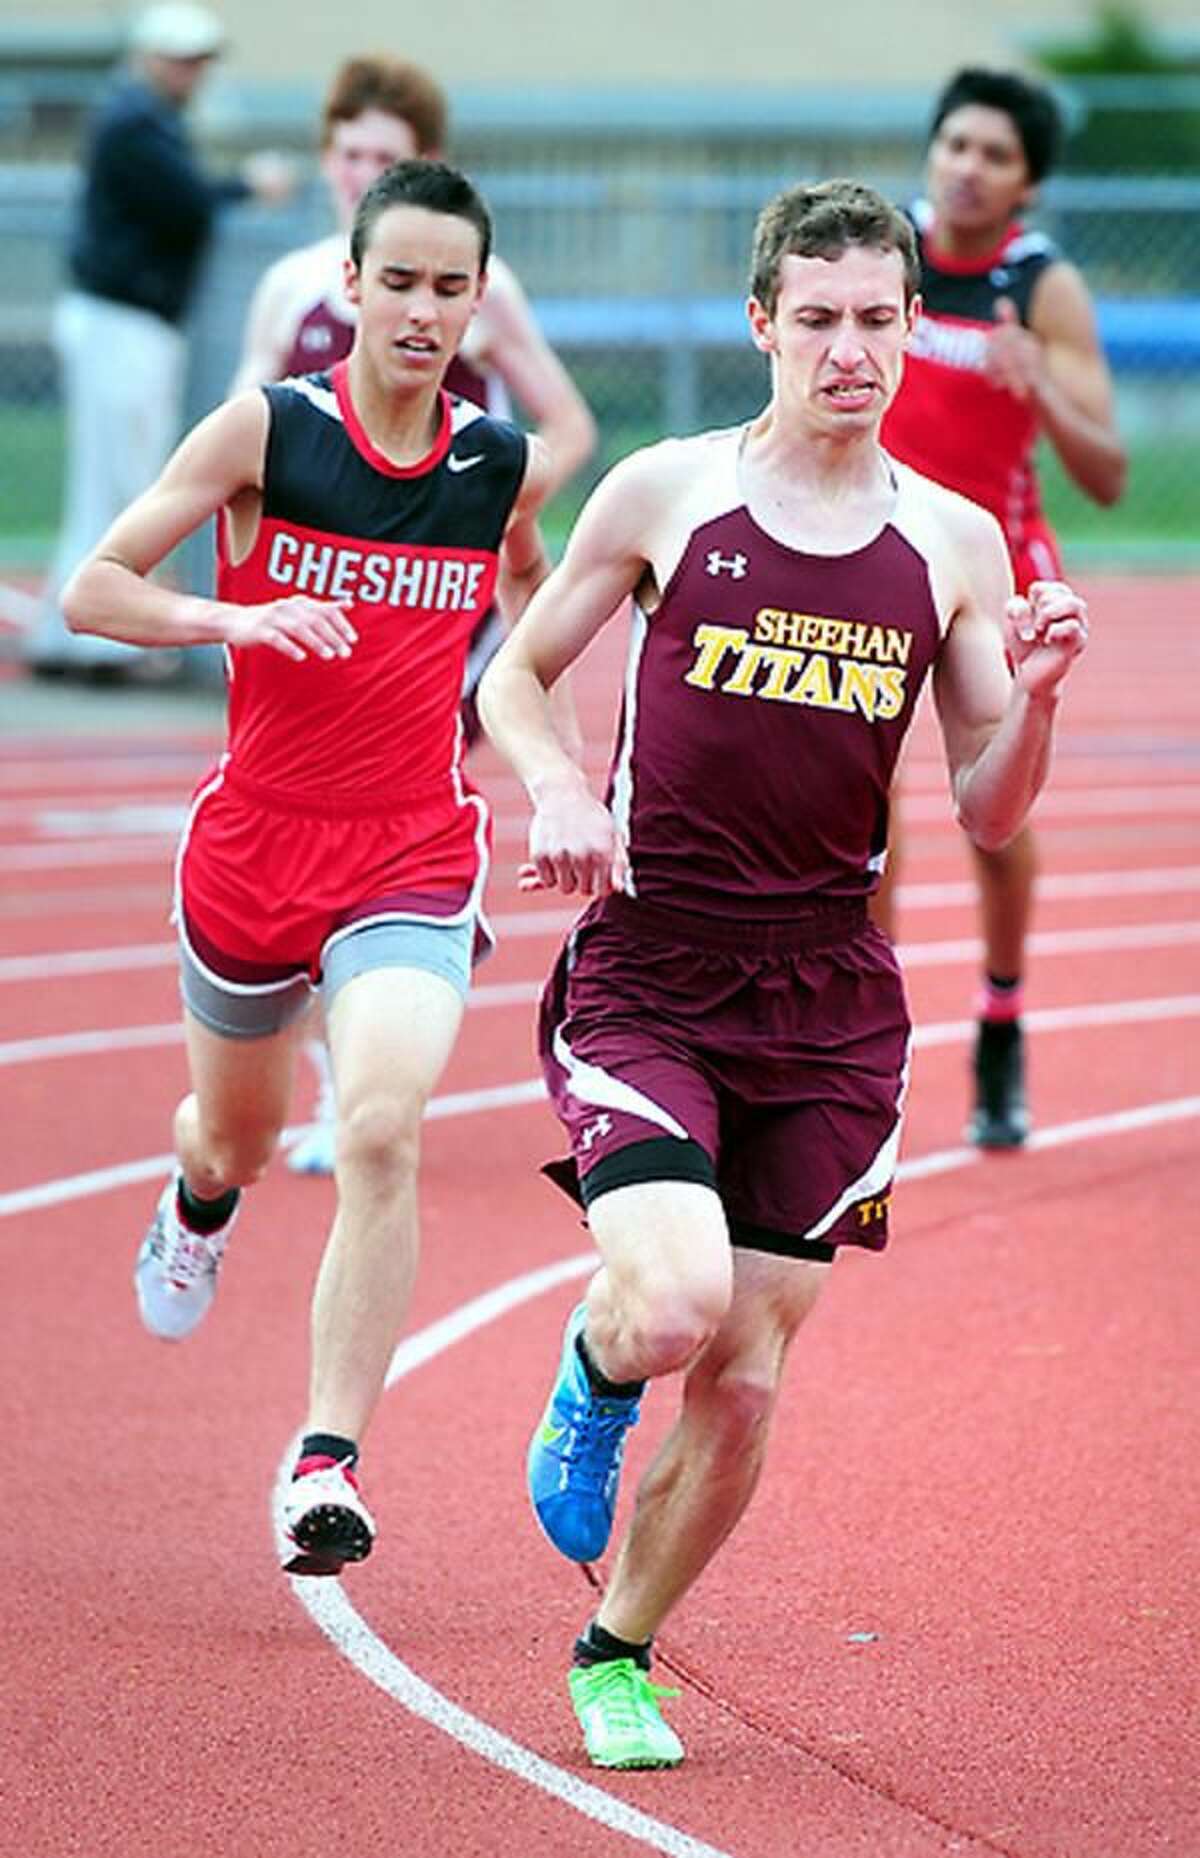 Tommy Lupoli (right) of Sheehan leads in the final lap of the 1600 meter run with Trey Phillips (left) of Cheshire close behind in a meet at Cheshire on 4/24/2012. Photo by Arnold Gold/New Haven Register